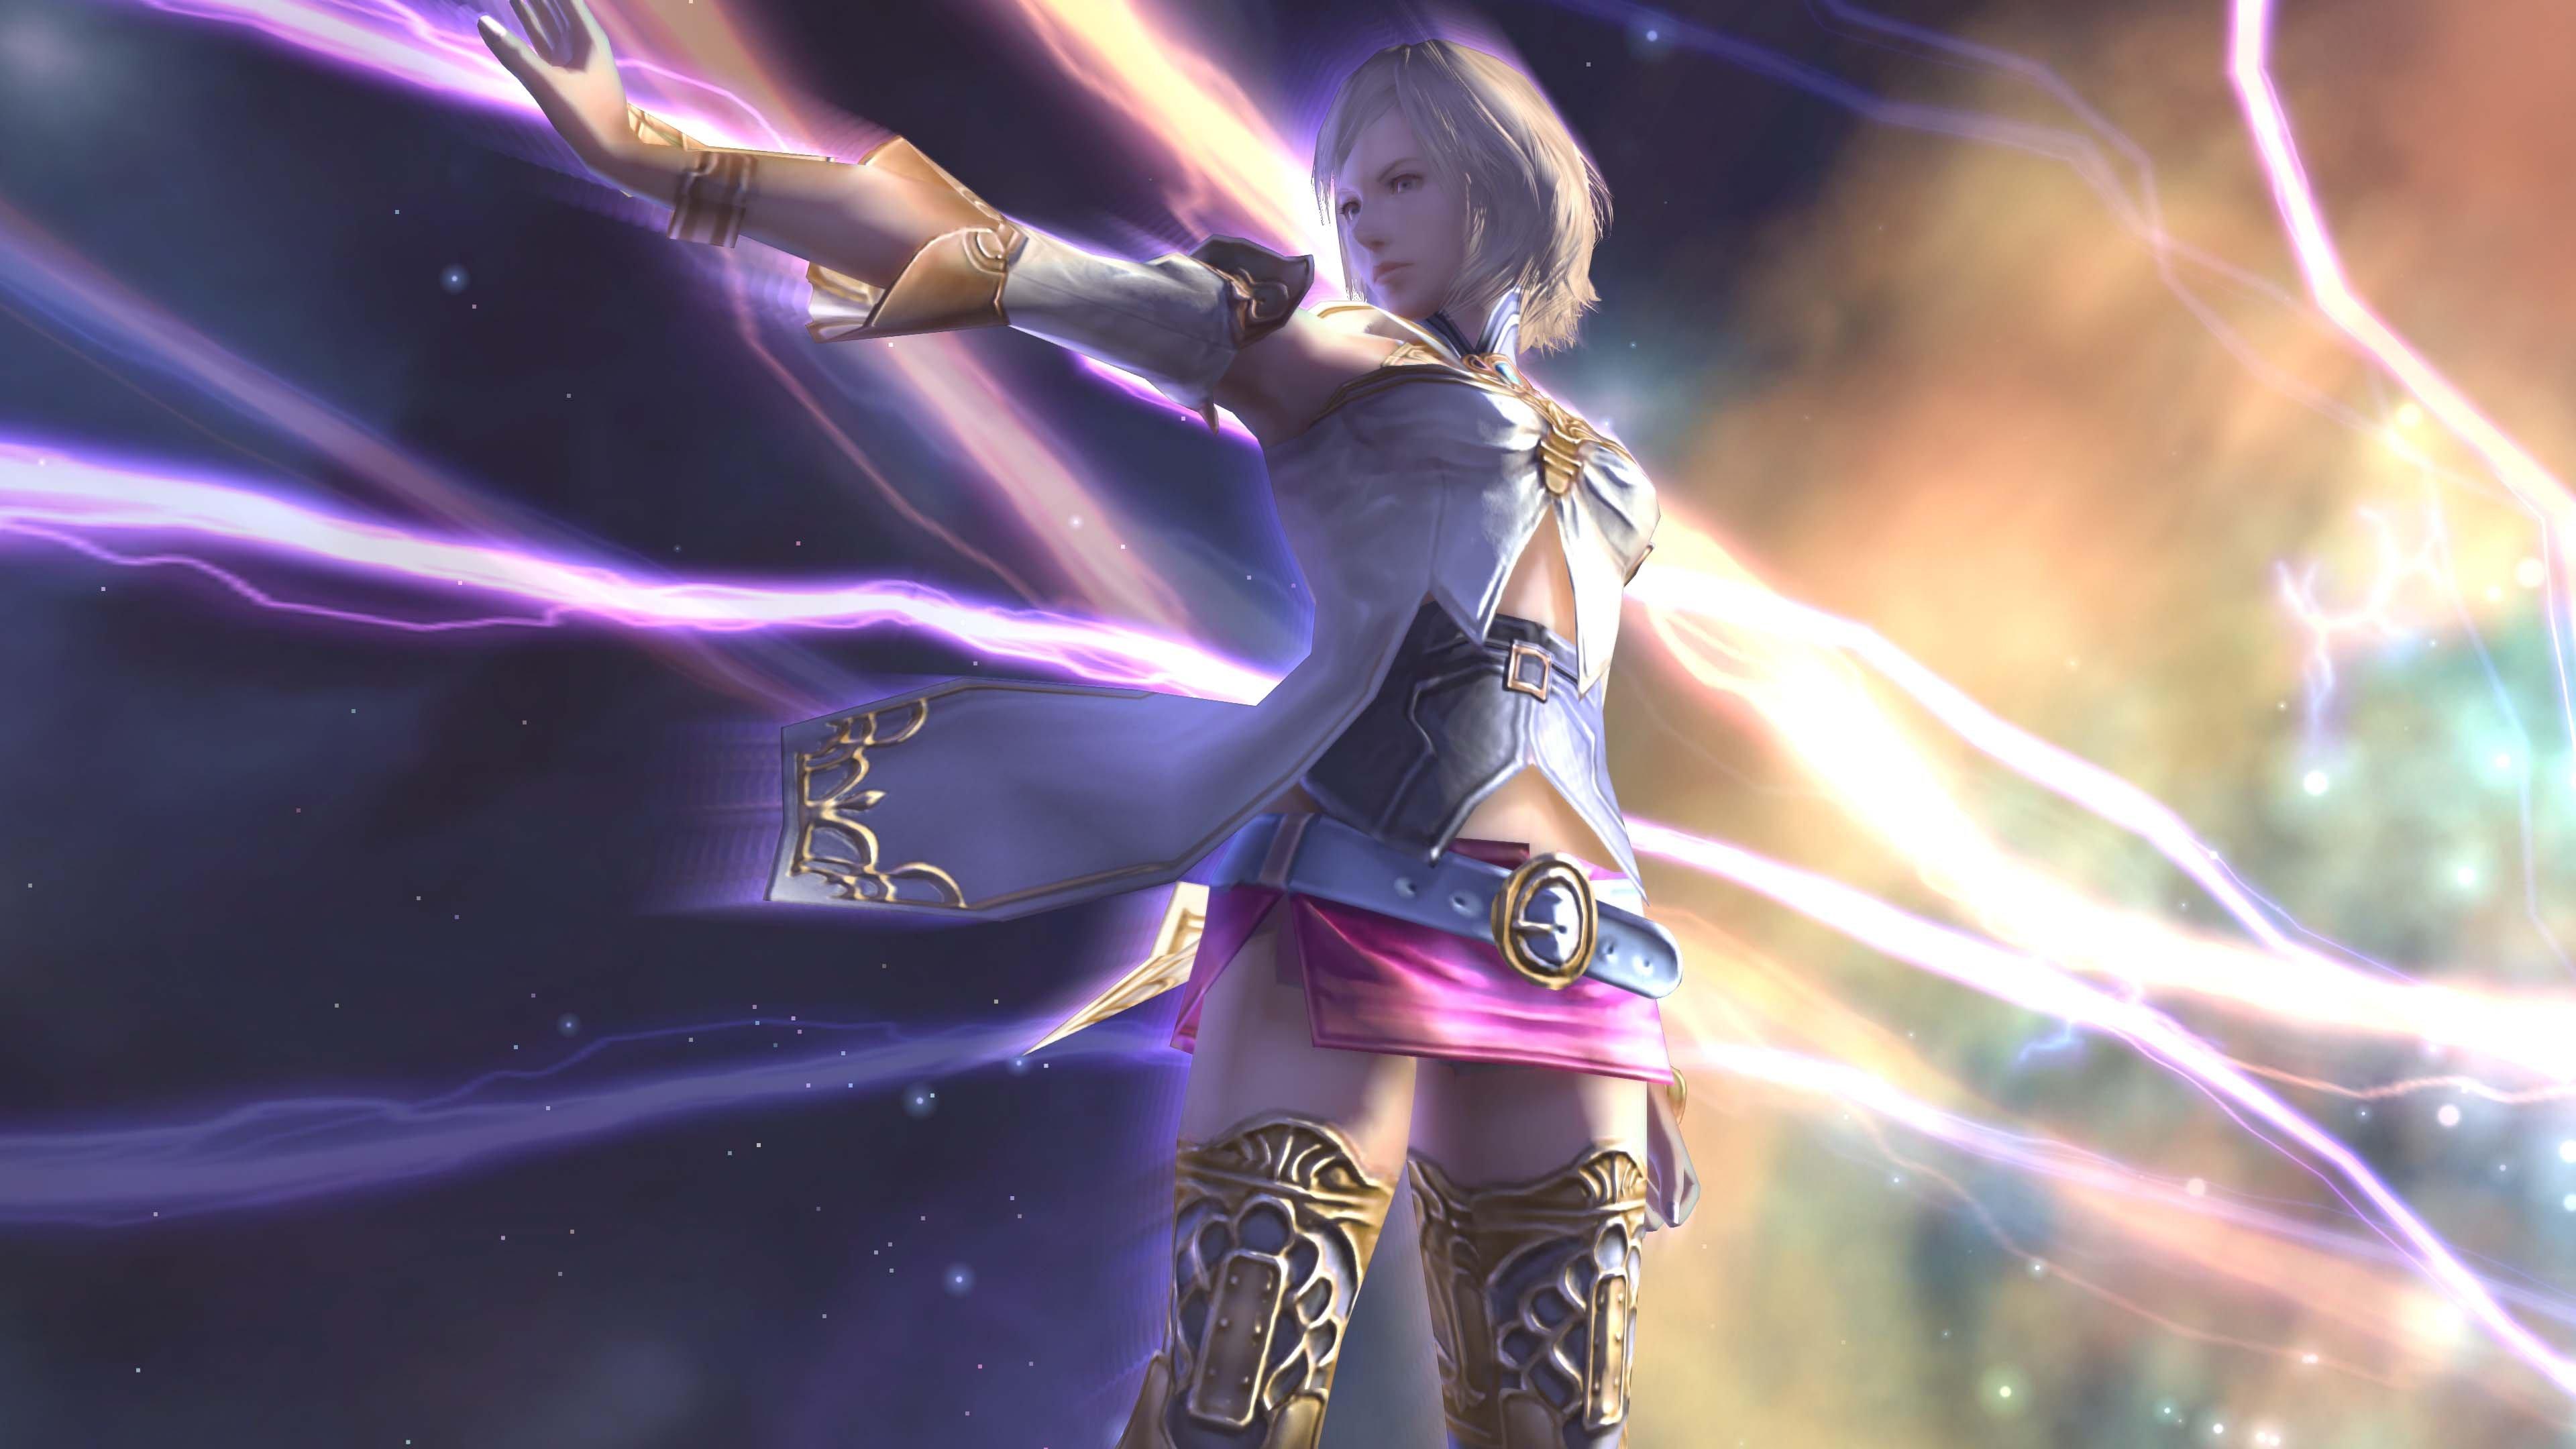 Final Fantasy XII: The Zodiac Age launches July 11 in North